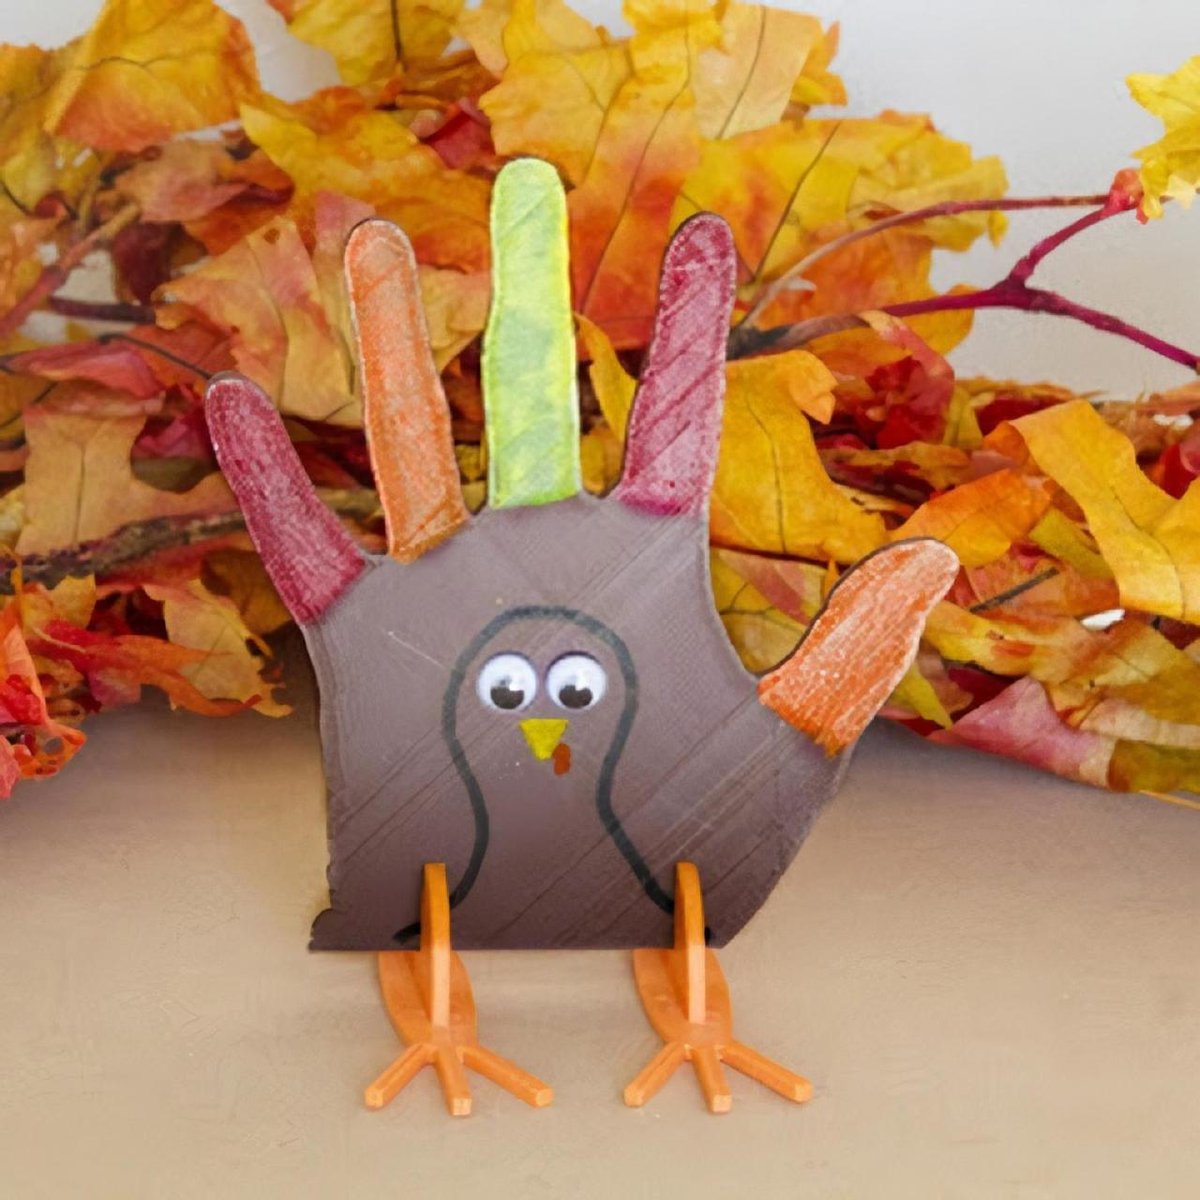 A 3D printed turkey hand is great for younger kids